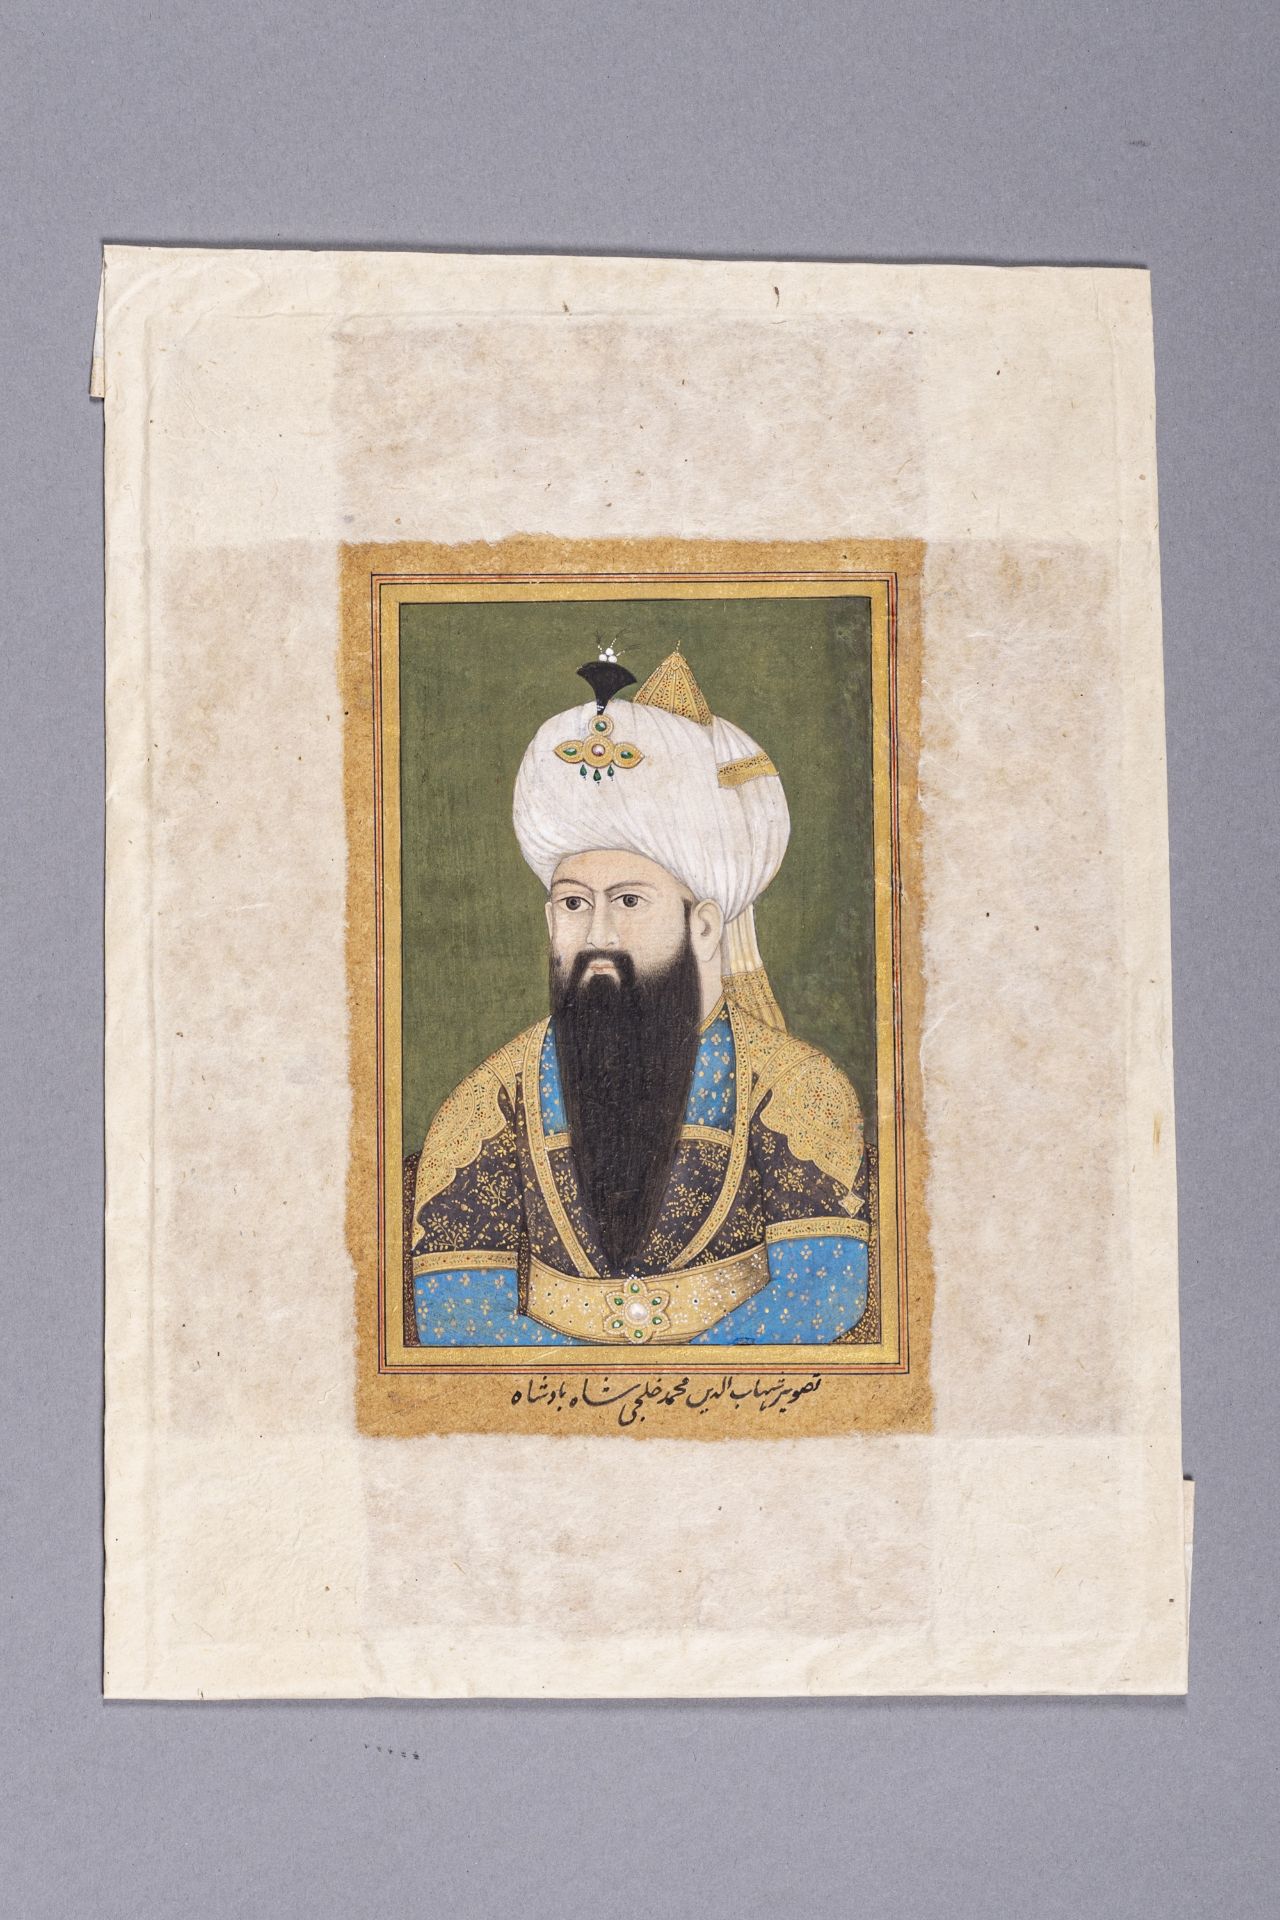 AN INDIAN MINIATURE PAINTING WITH PORTRAIT OF A MUGHAL NOBLEMAN, LATE 19th CENTURY - Image 2 of 5